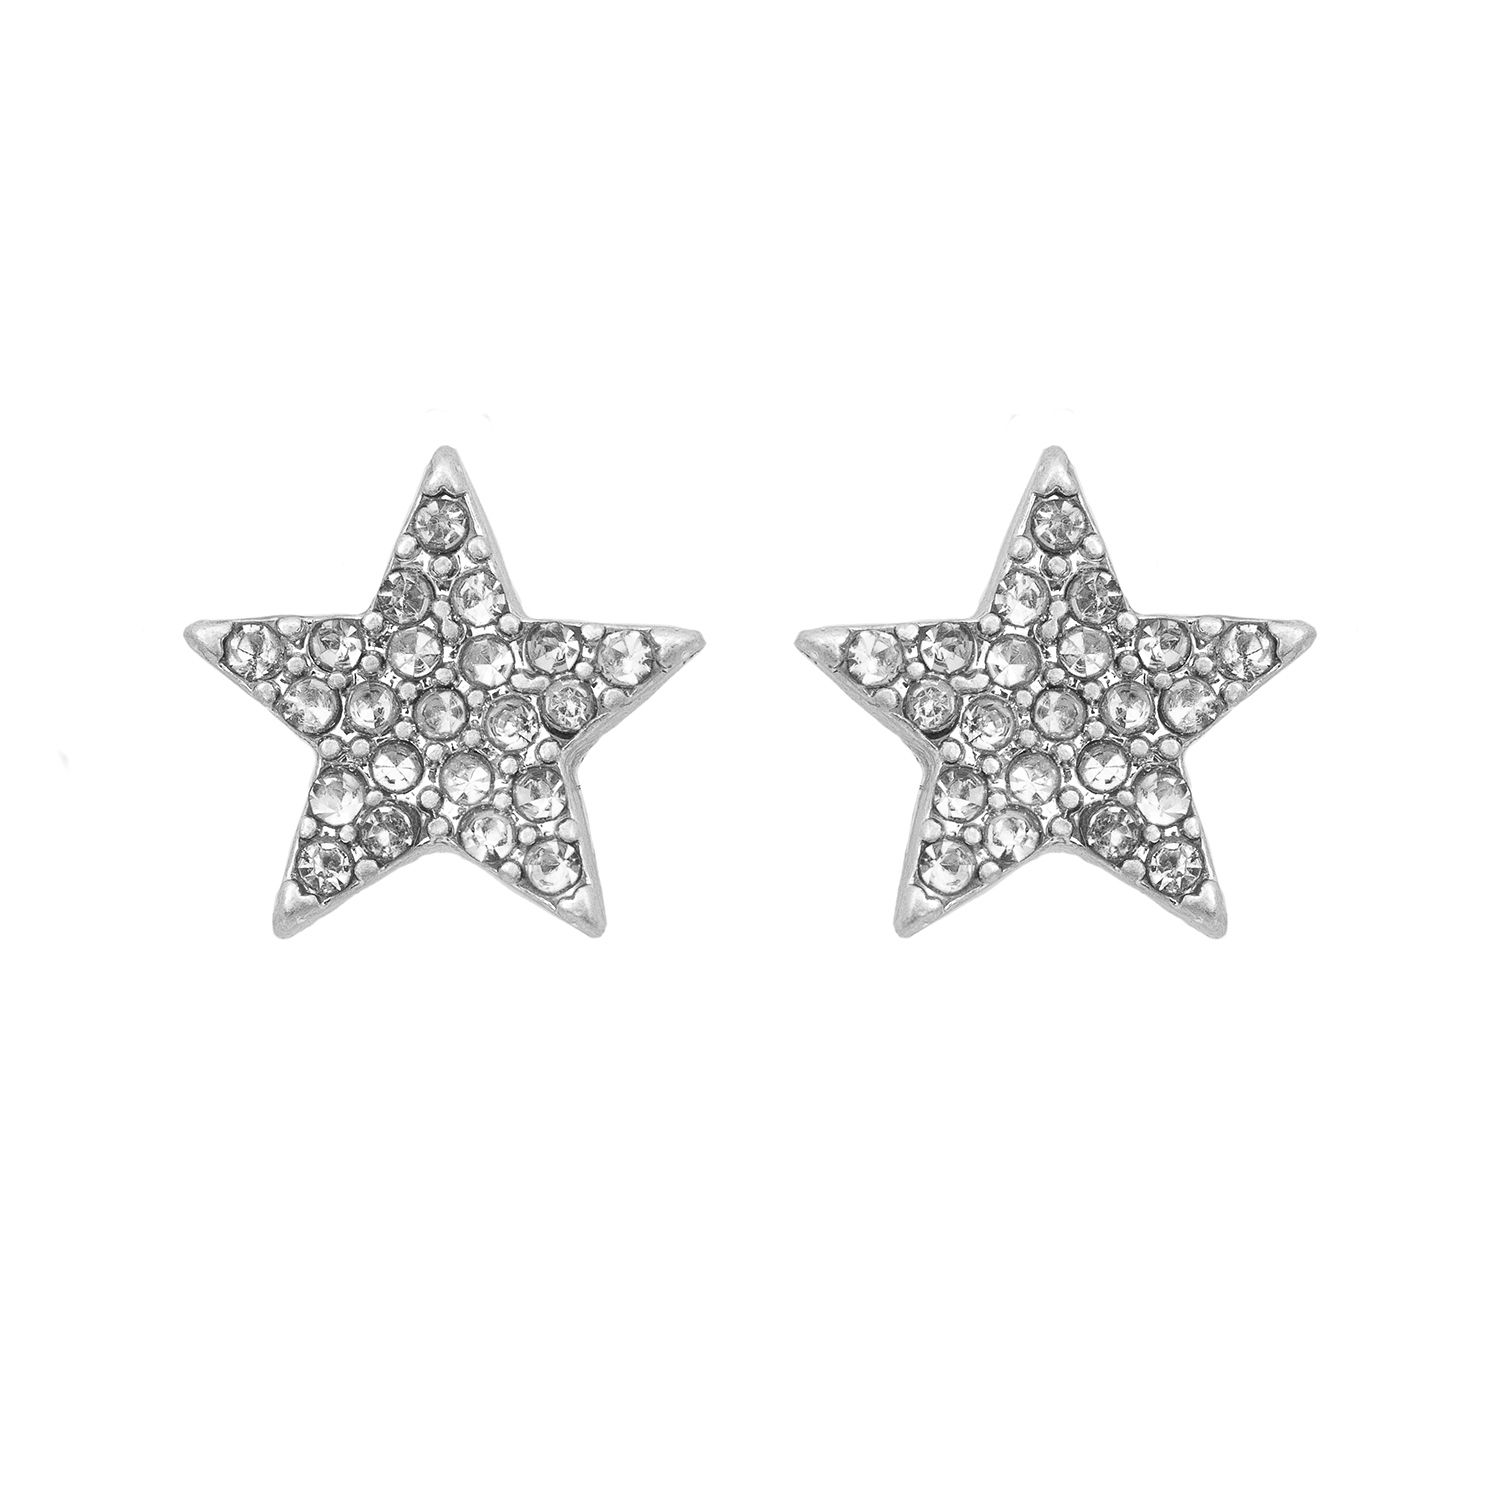 This might be the cleverest earring design you ever did see! One earring, three ways to work it! First as a simple sparkling star stud, then simply attach the gorgeous cascading stars one of two ways, either behind or in front of the ear for two glammed up looks that are bang on trend this season. These silver plated star earrings star move delicately and shimmer in the light, and can be teamed as a set with the matching Sparkling Stars silver necklace and bracelet.